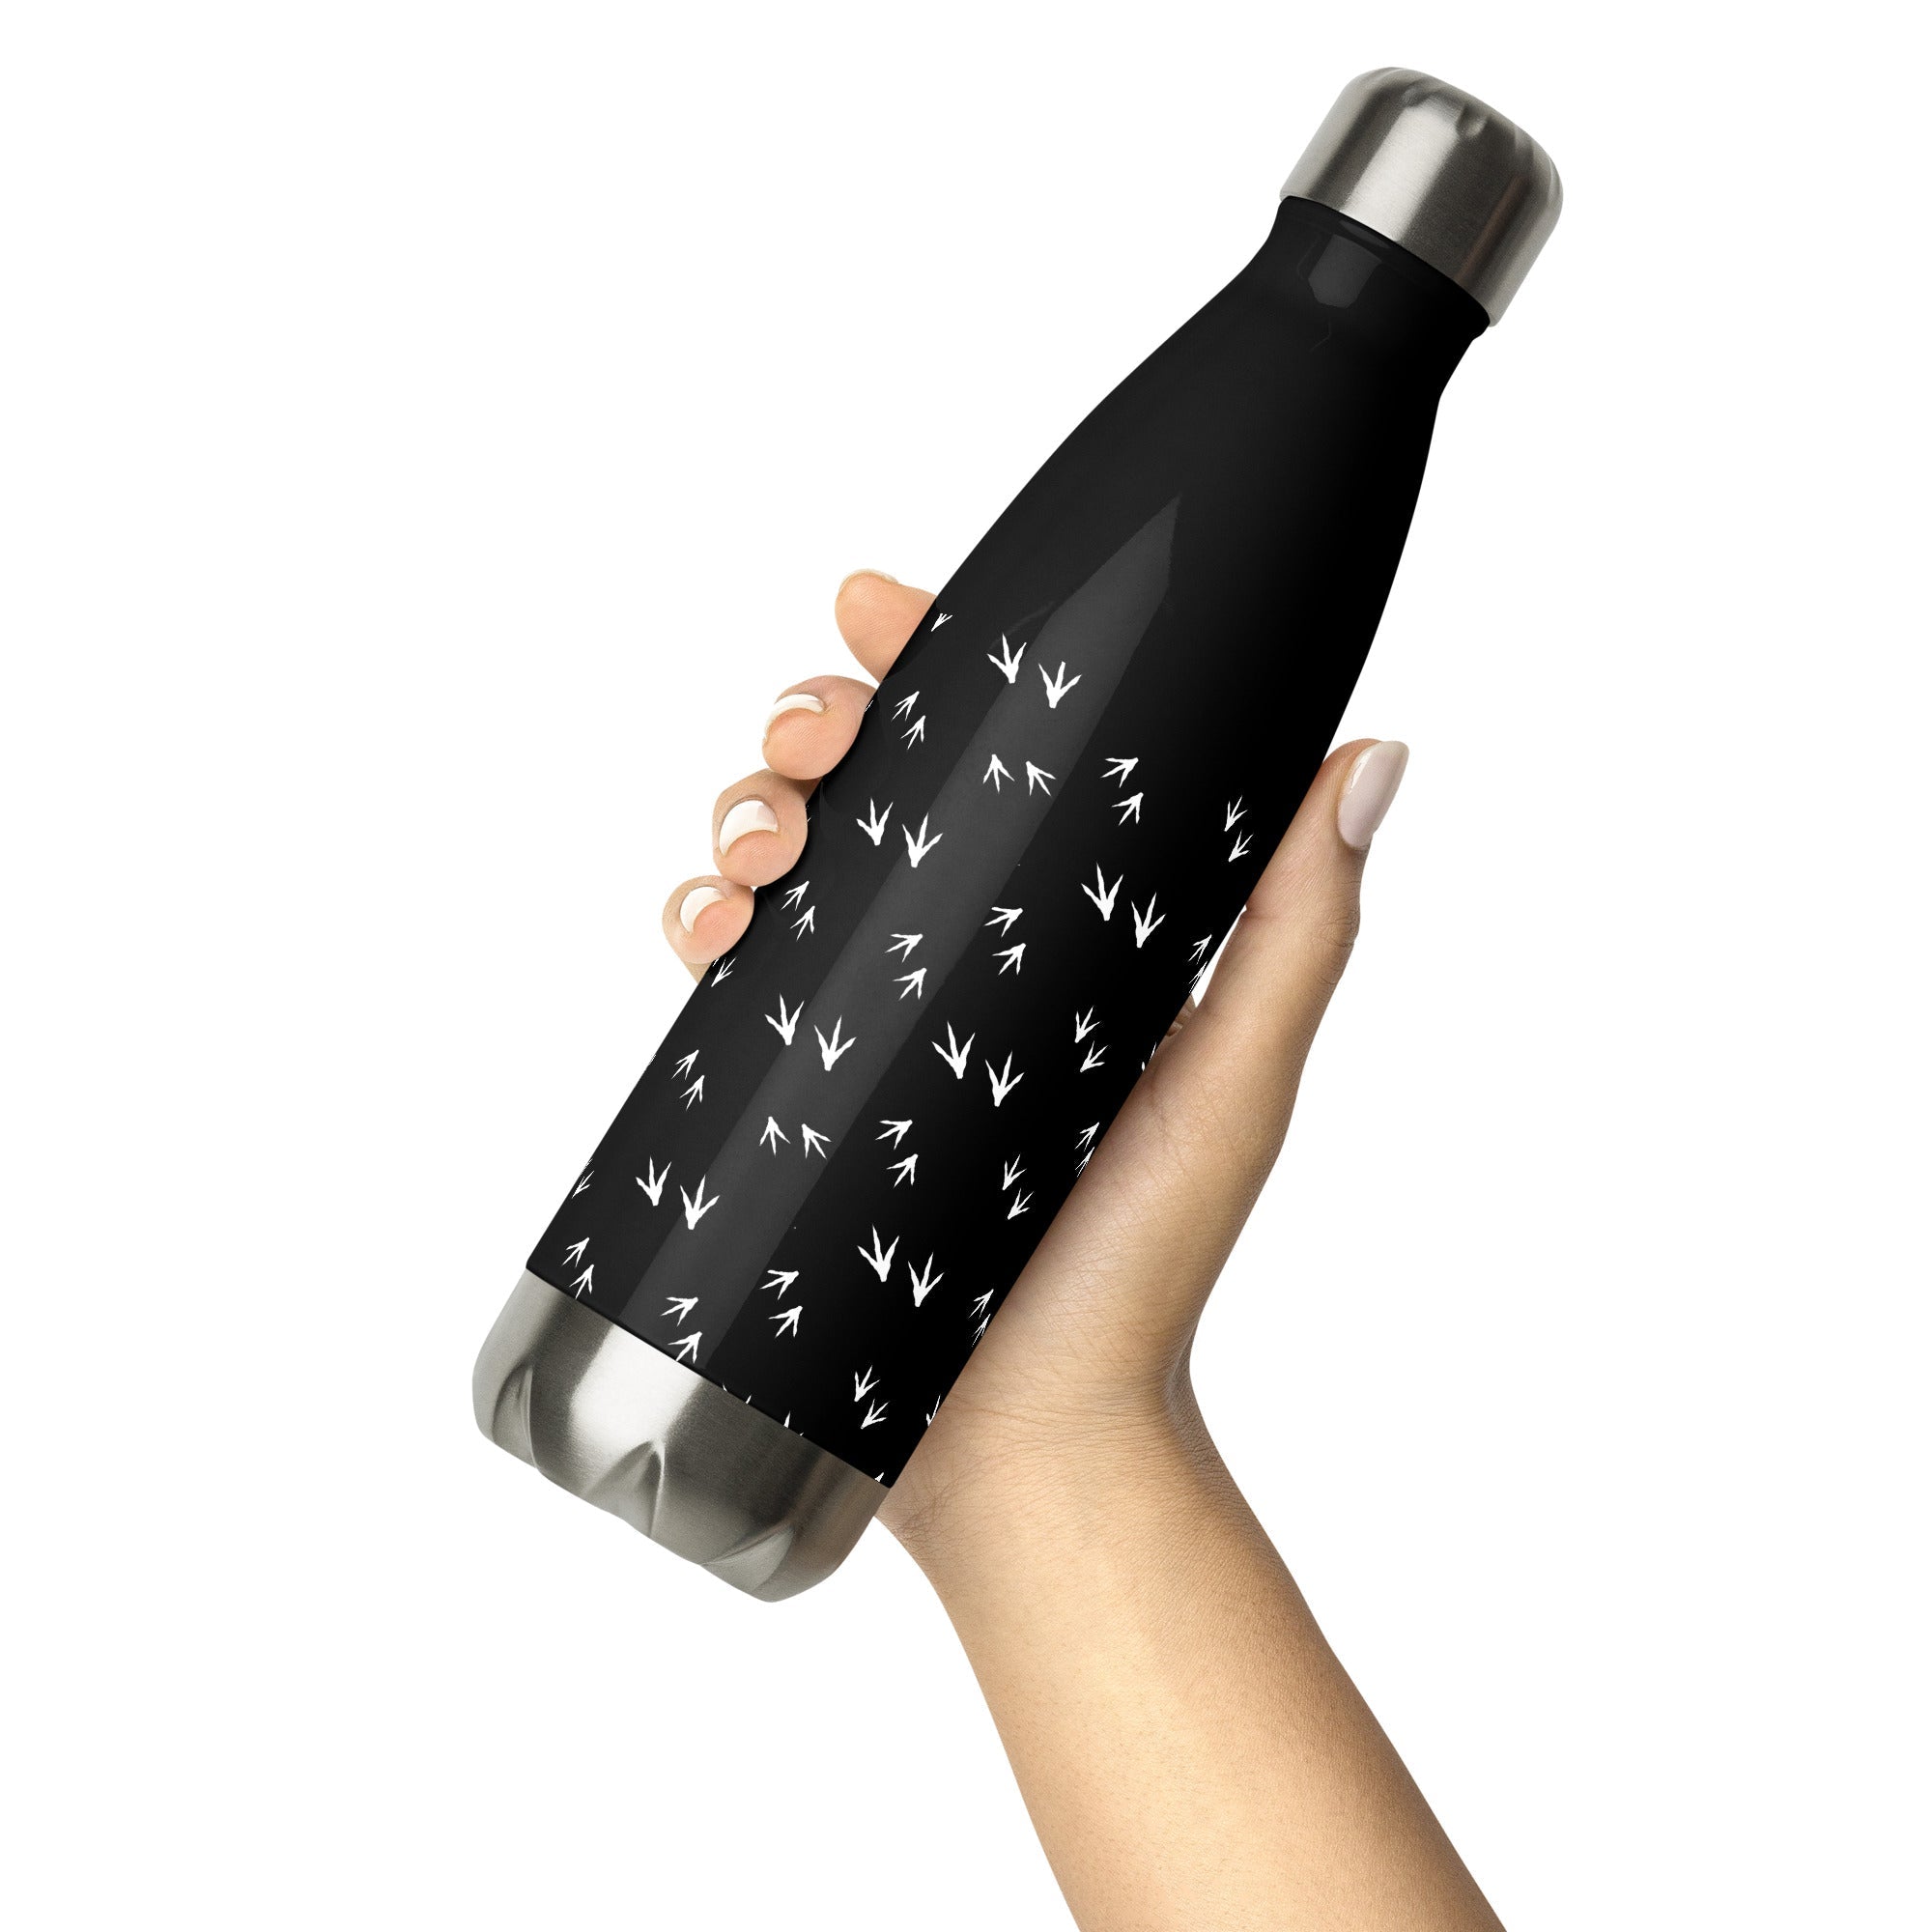 Chicken Feet Stainless Steel Water Bottle - Cluck It All Farms